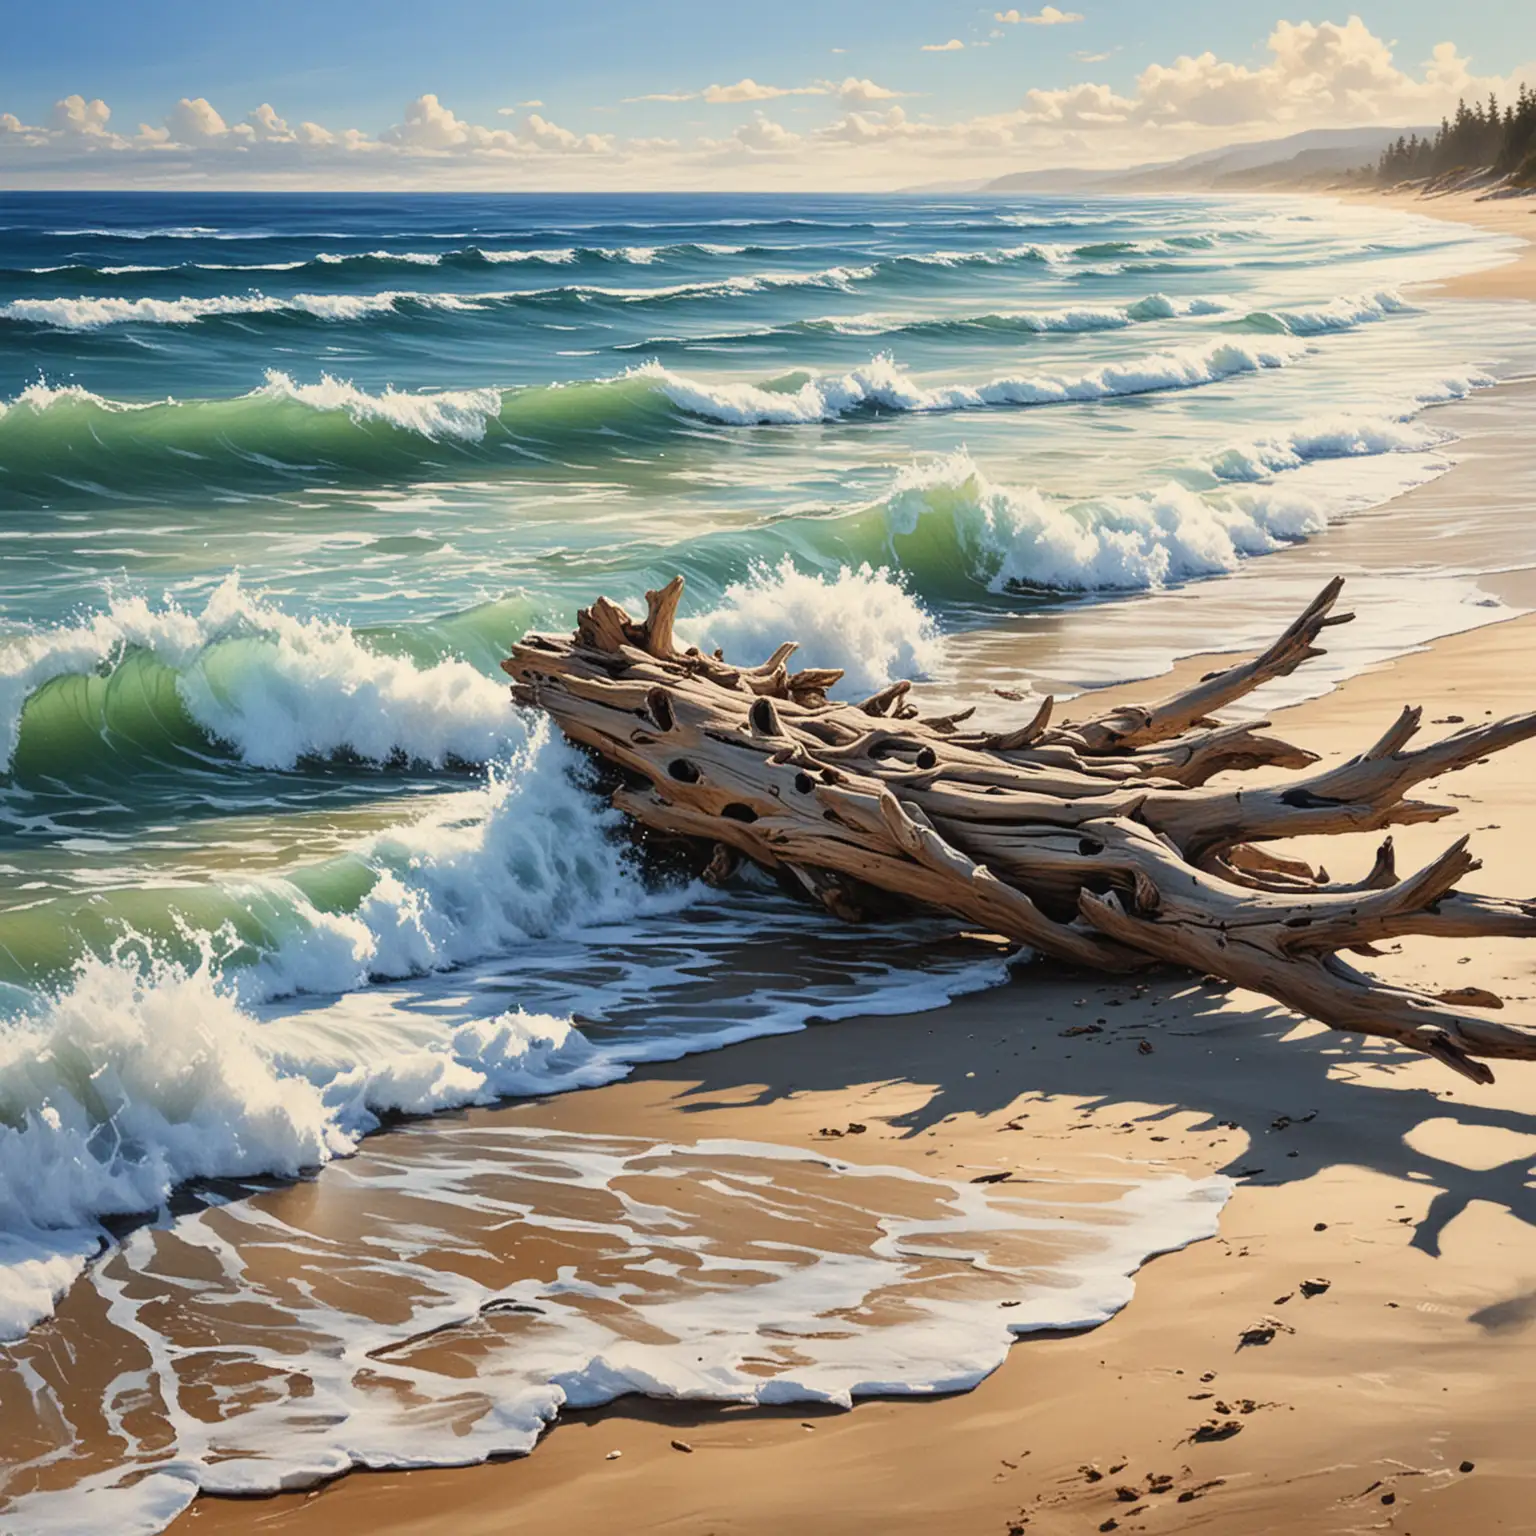 painting of driftwood on sandy beach blue ocean waves rolling in